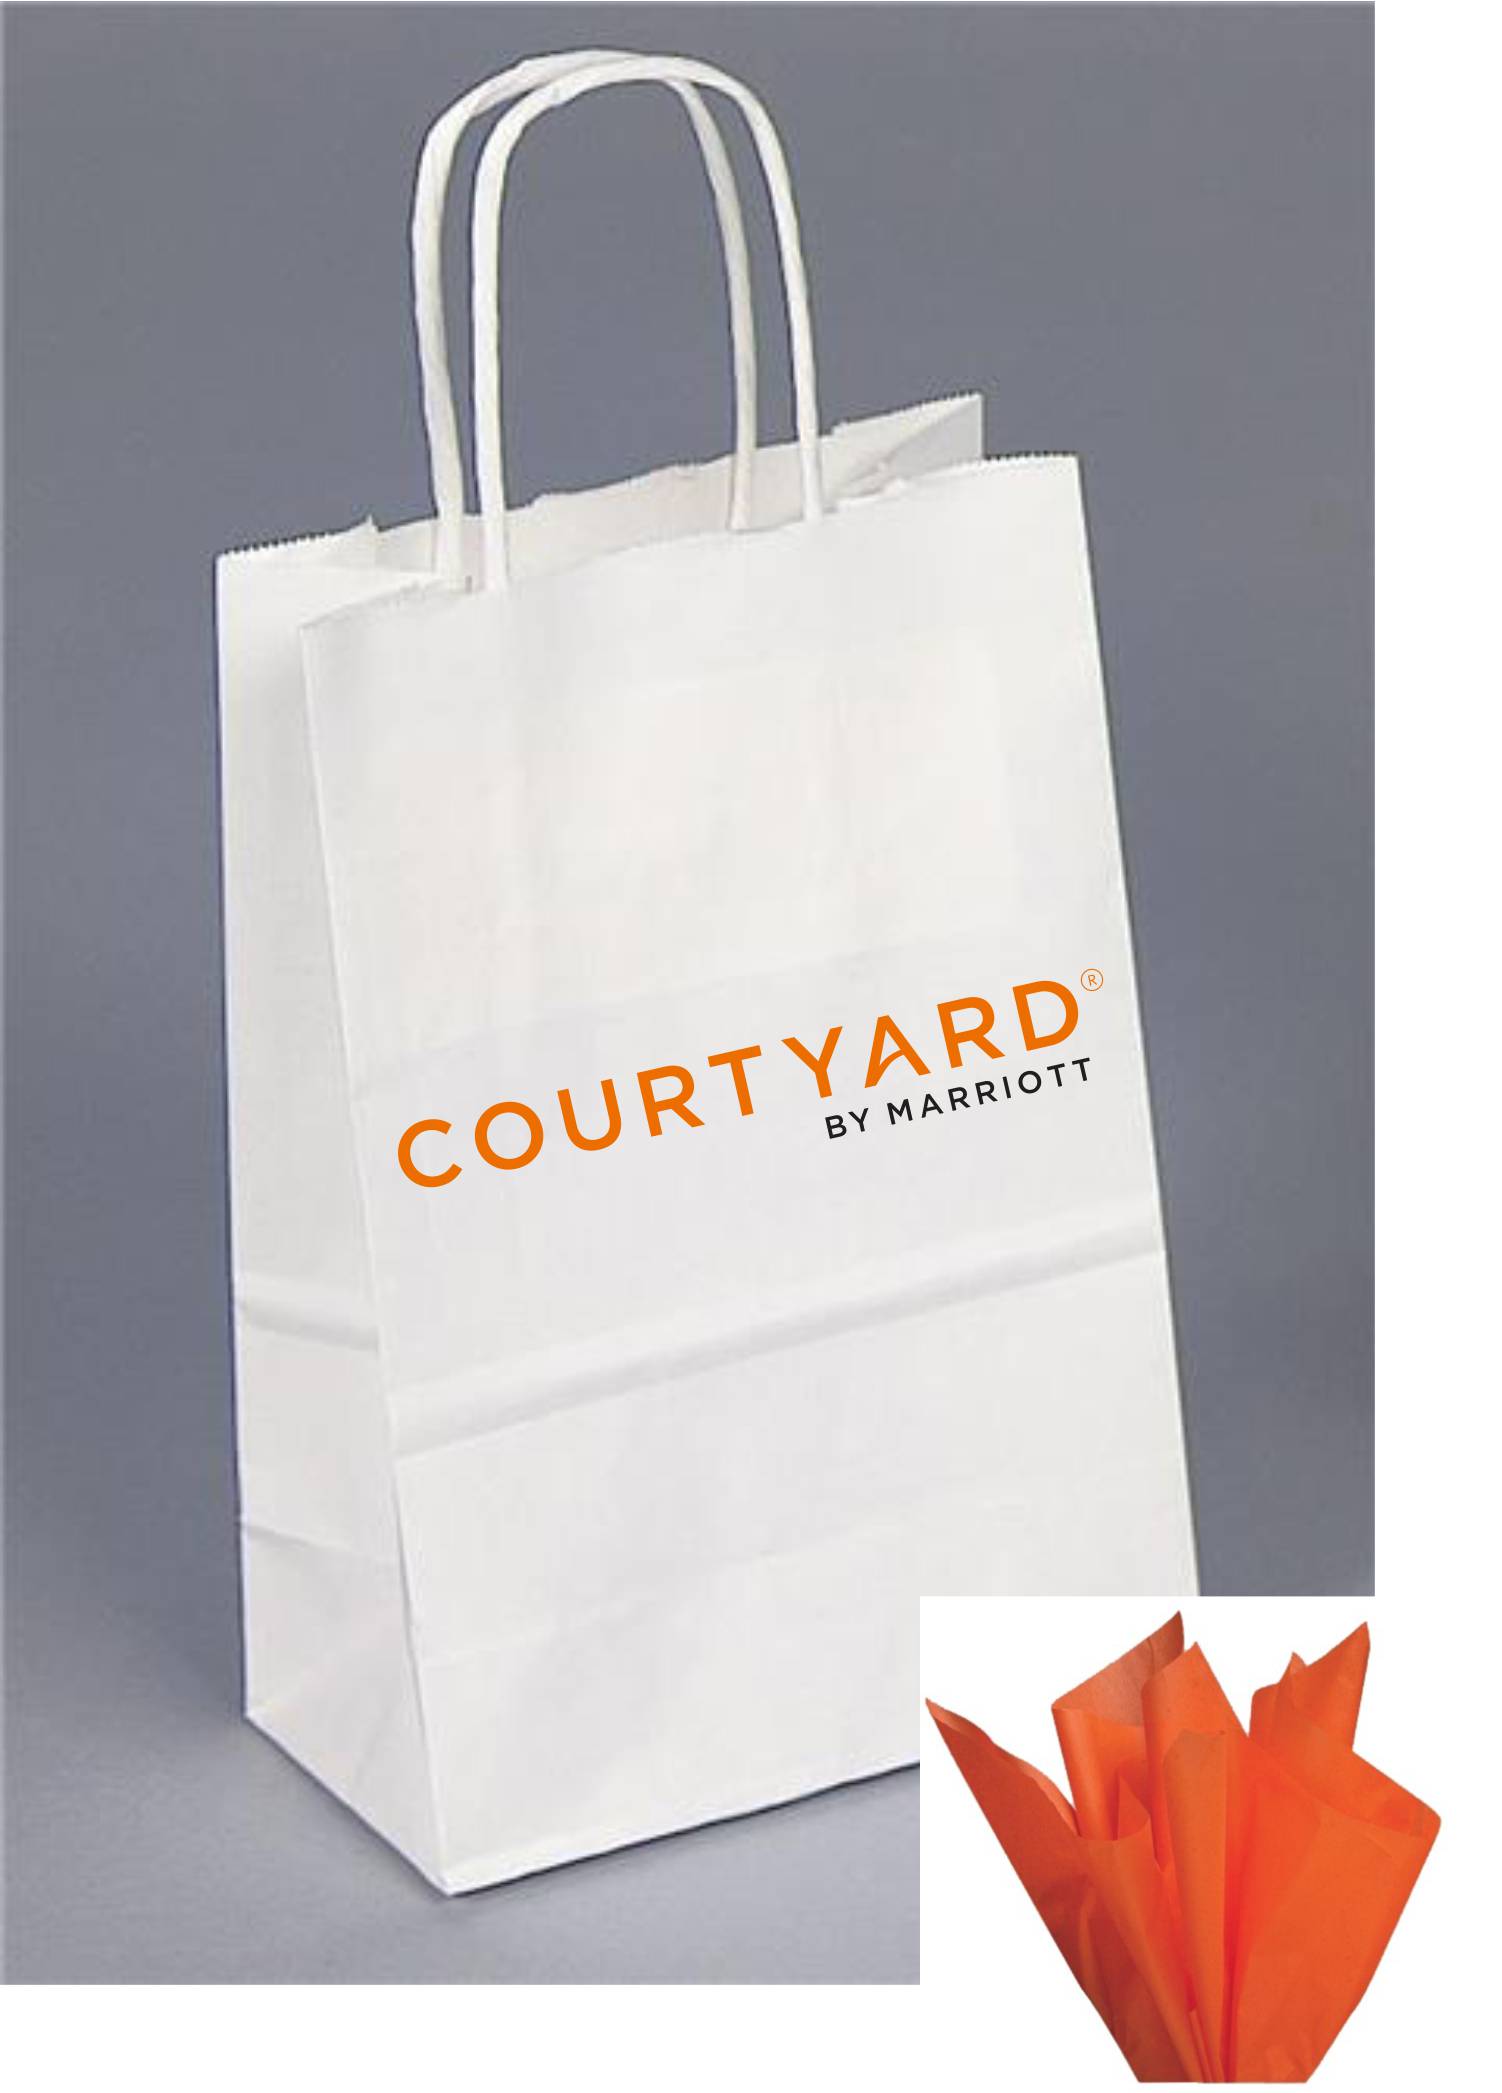 Full 2-color Courtyard label - Perfect for guests, clients and the breakfast bar!